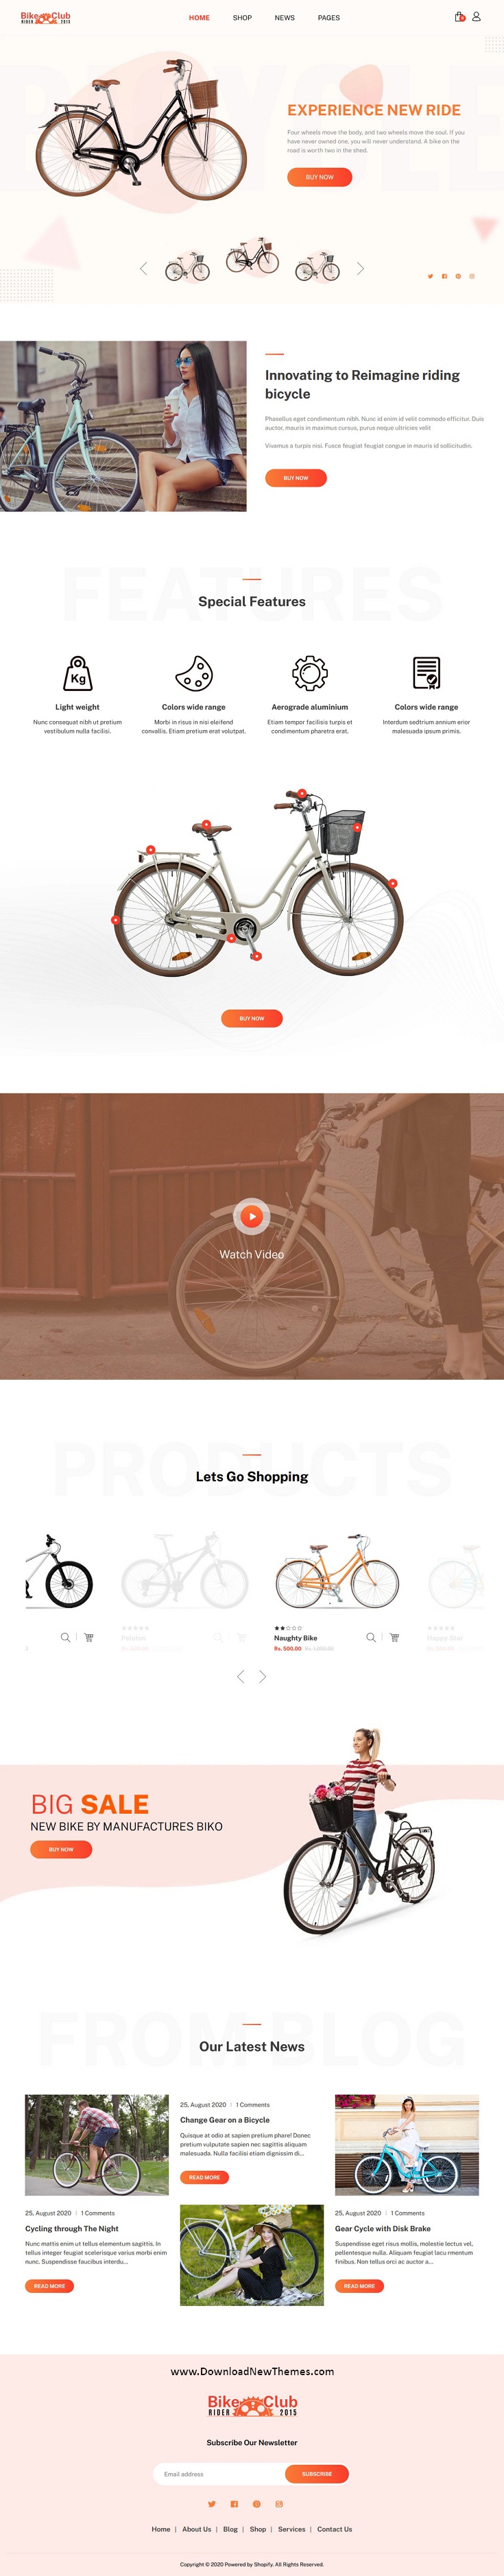 Best Single Product Shopify Theme